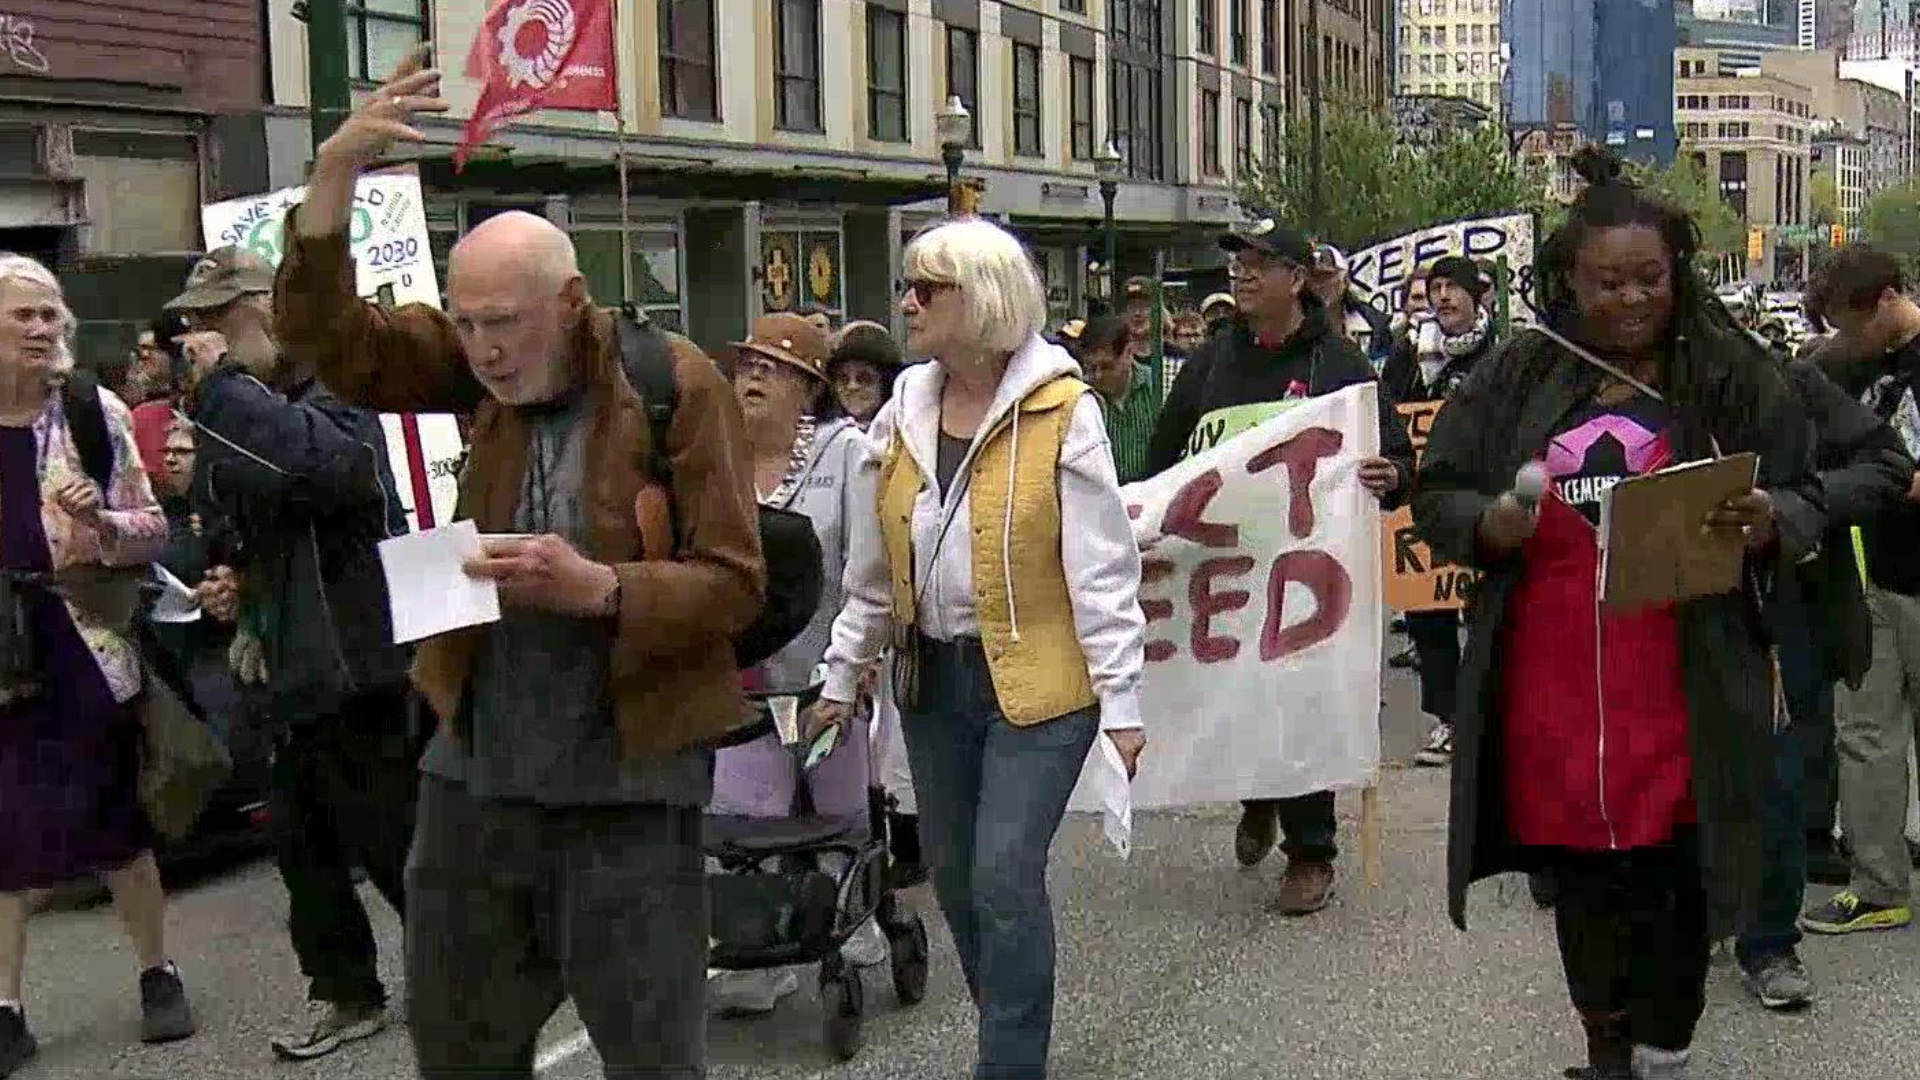 Downtown Eastside residents march to raise awareness of housing crisis